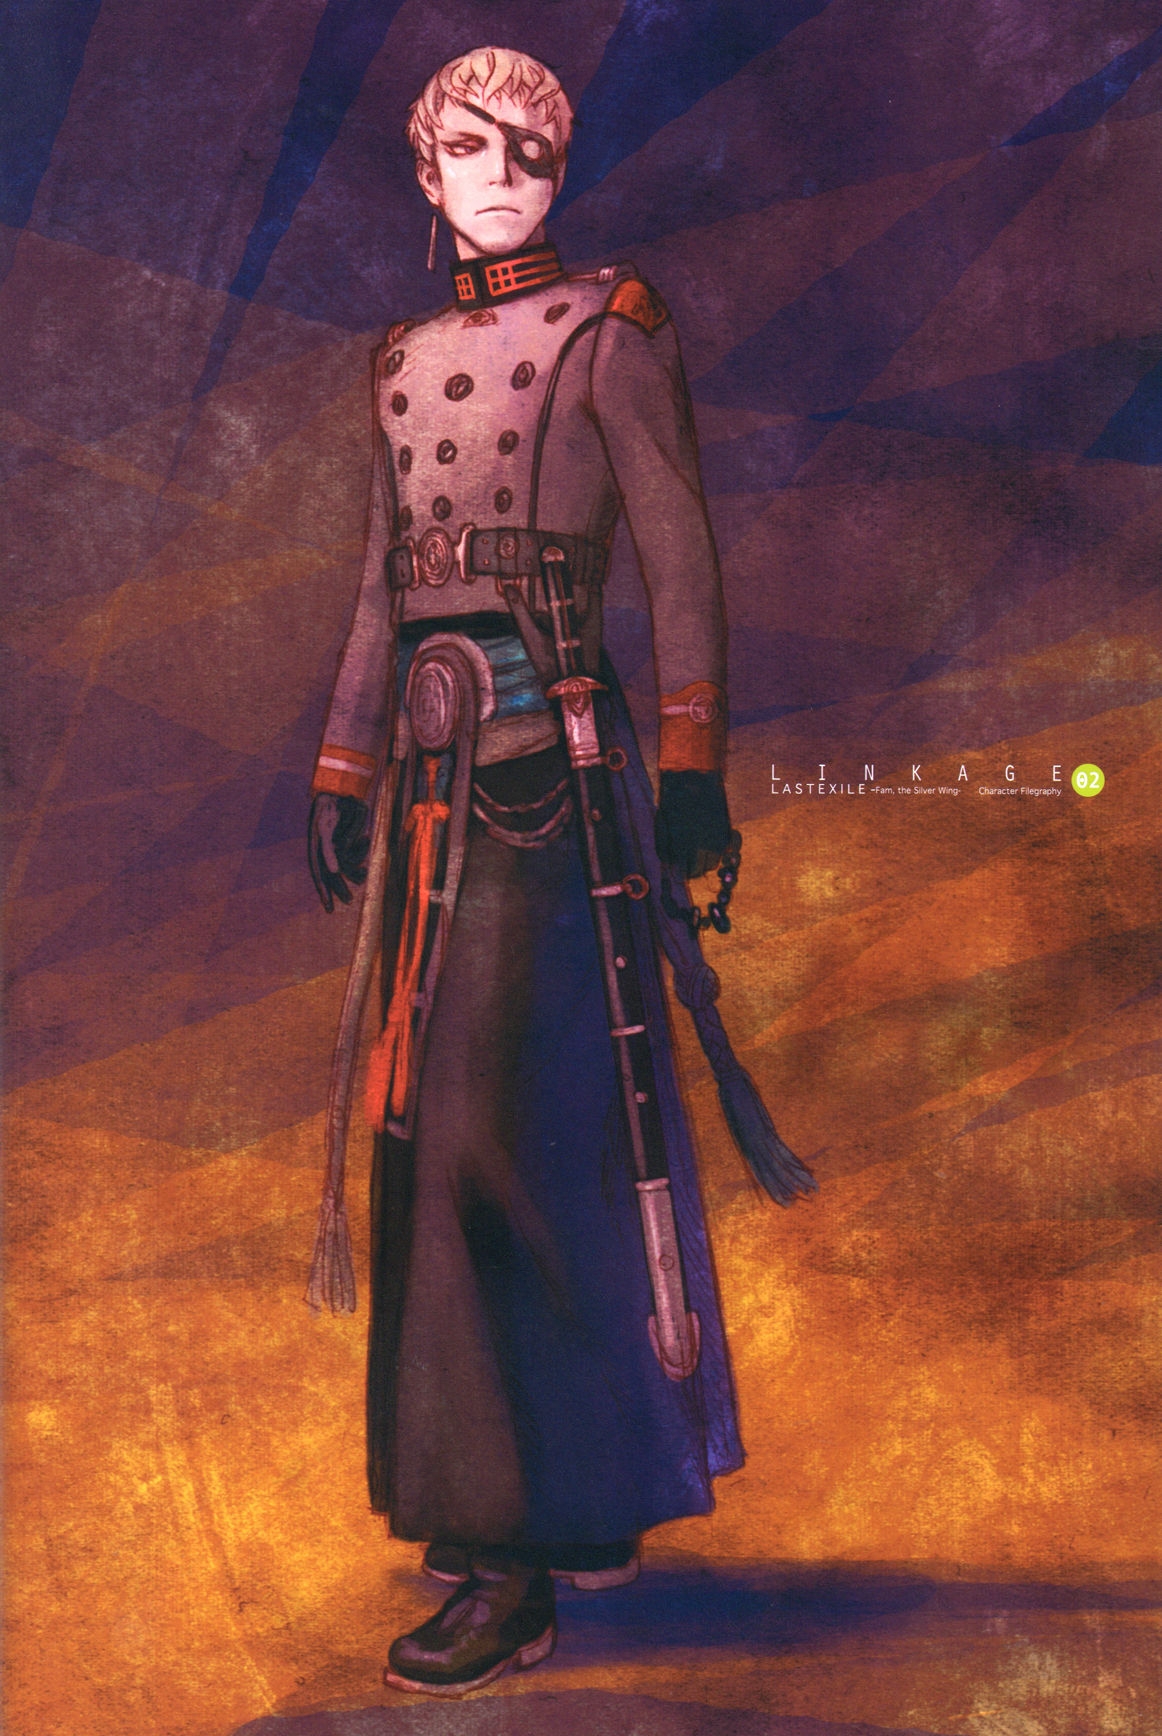 [Pasta's Estab (Range Murata)] Linkage - Last Exile ~ Fam, The Silver Wing - Character Filegraphy 02 5